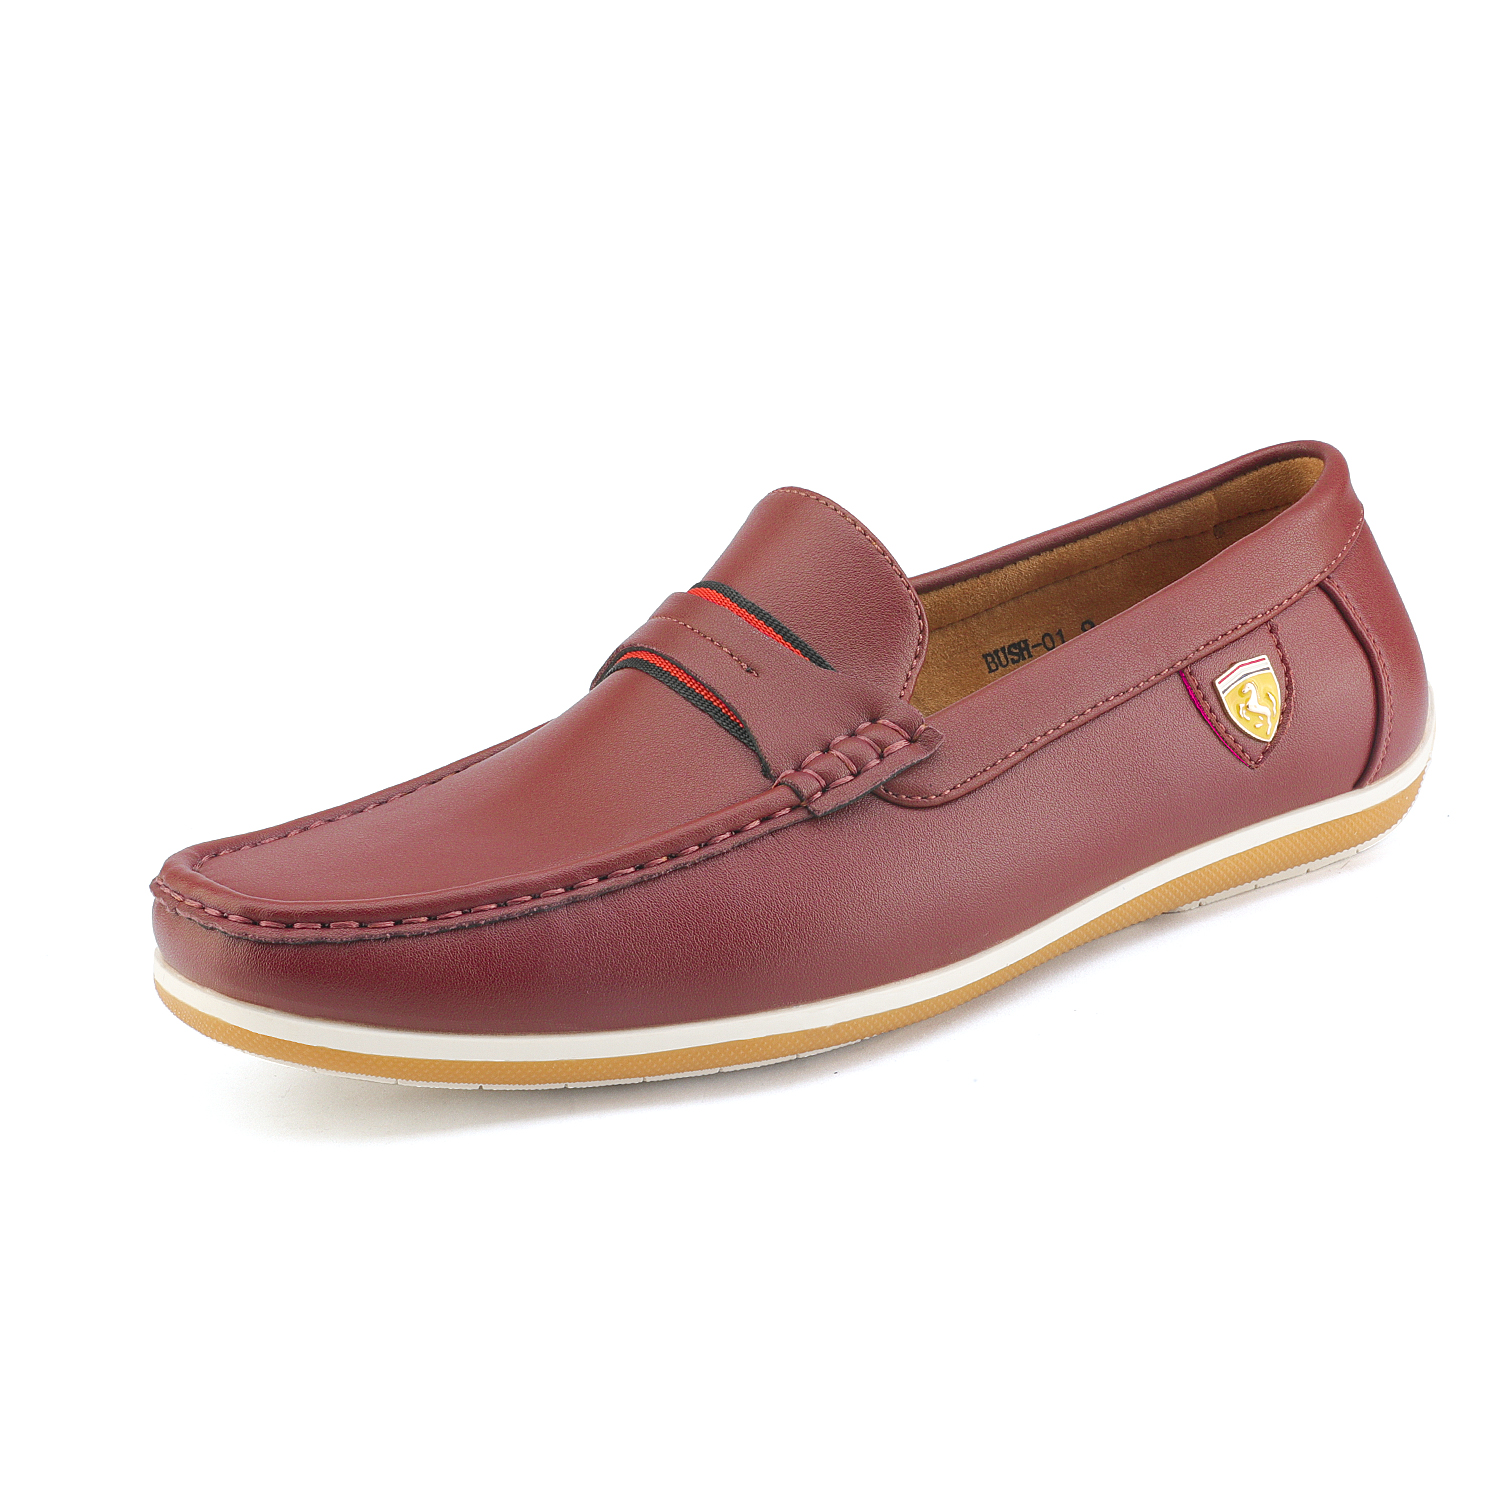 Bruno Marc Men's Casual Lightweight Loafers Shoes Lazy Moccasins Loafers Driving Soft Shoes For Men BUSH-01 BURGUNDY Size 13 - image 1 of 5